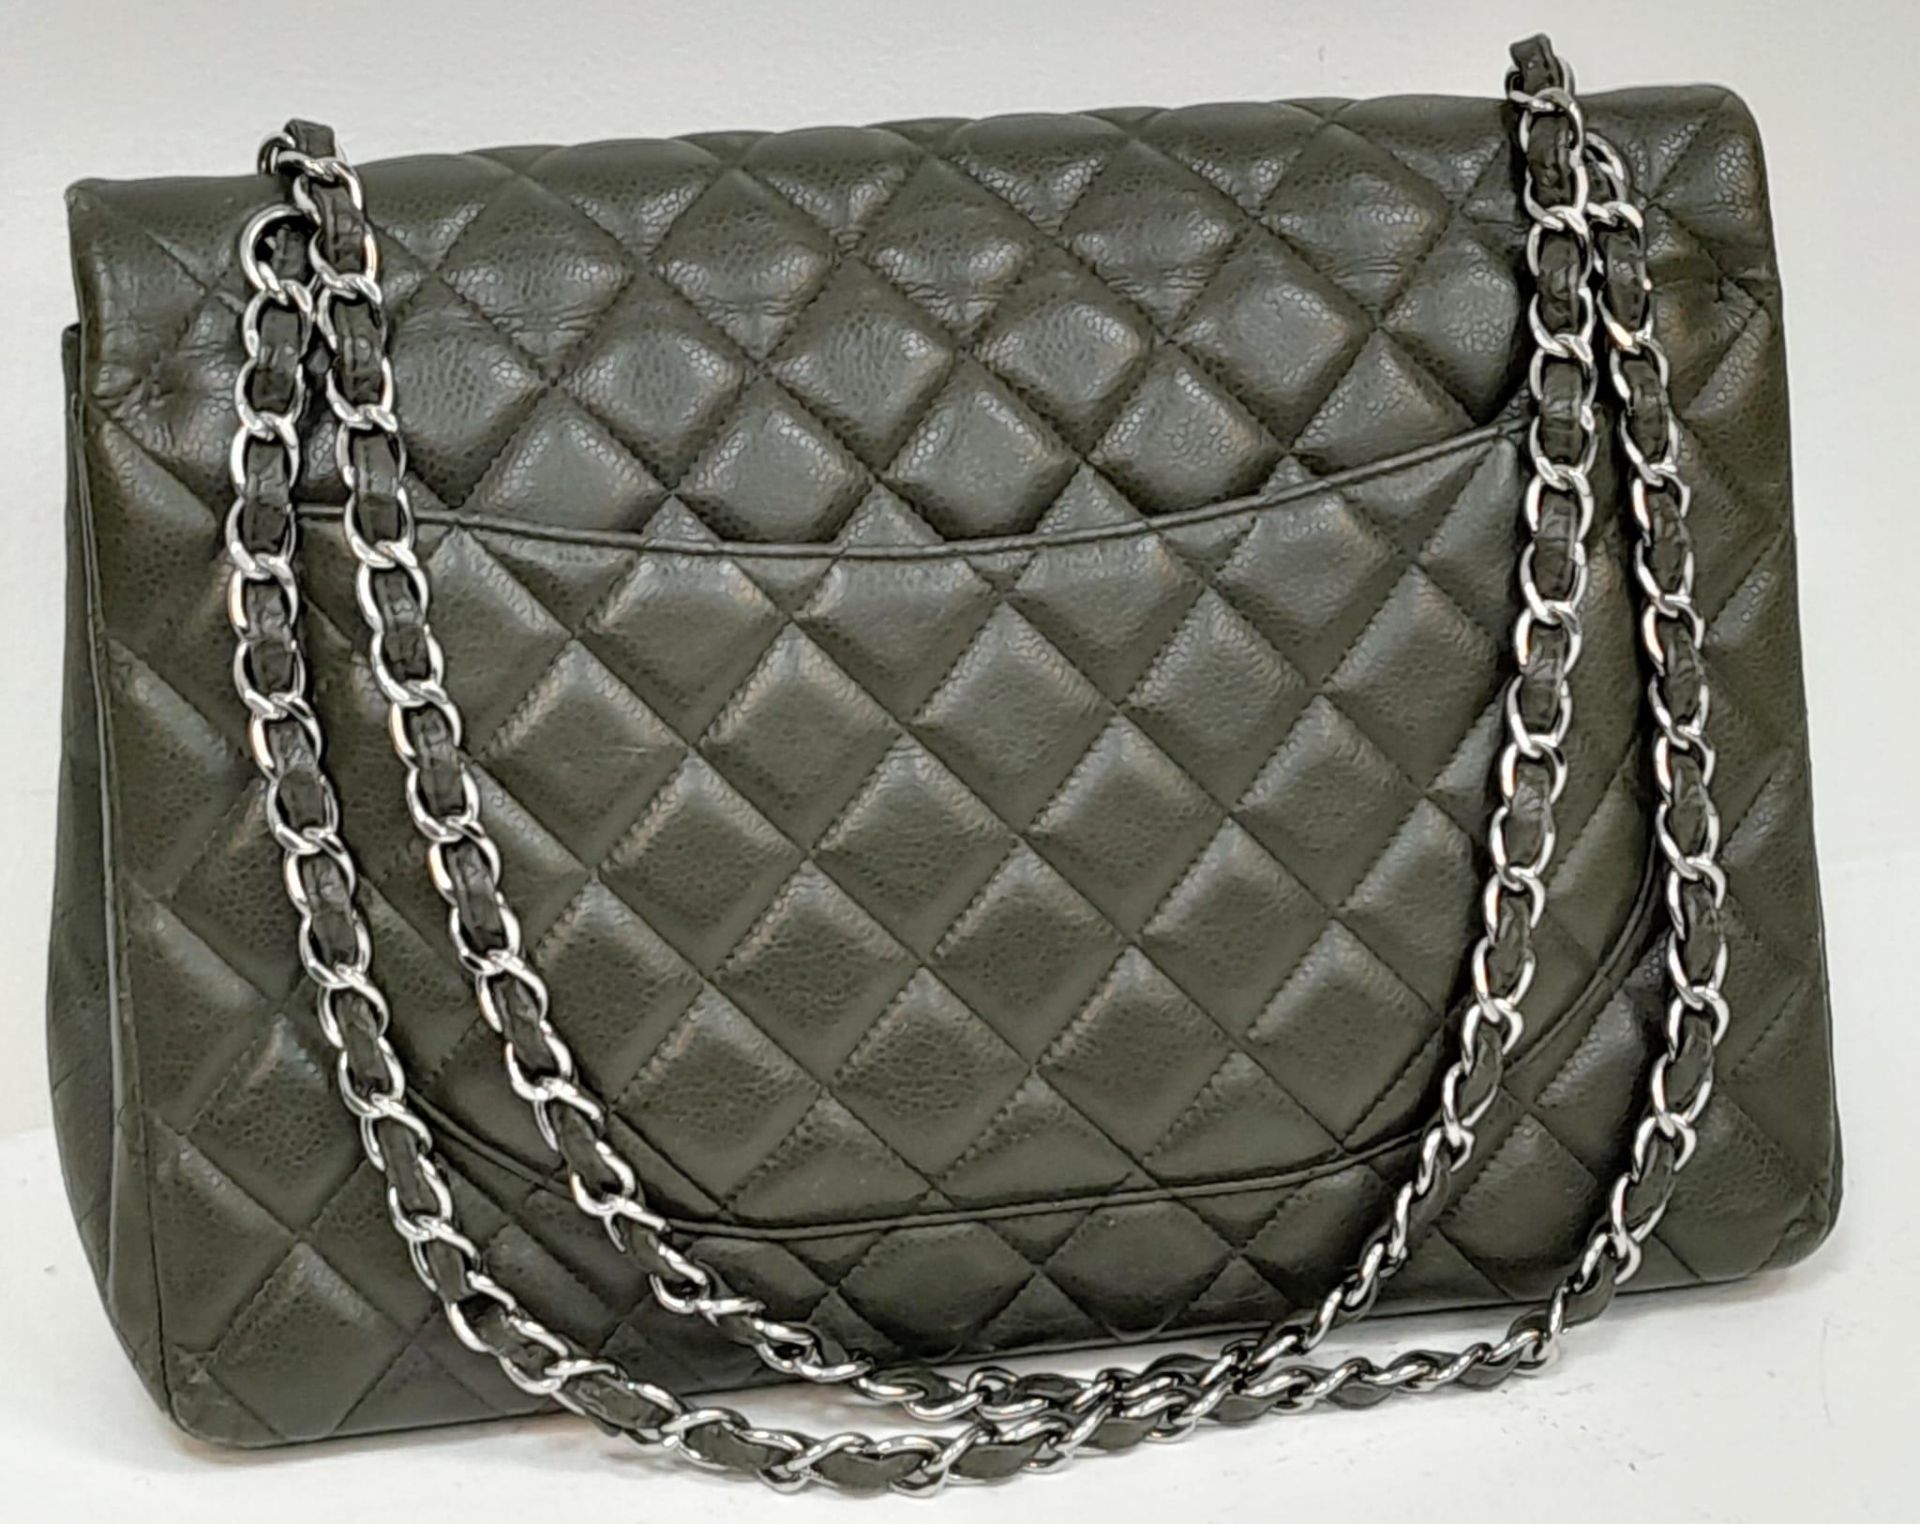 A Chanel Green Jumbo Classic Double Flap Bag. Quilted leather exterior with silver-toned hardware, - Image 4 of 14